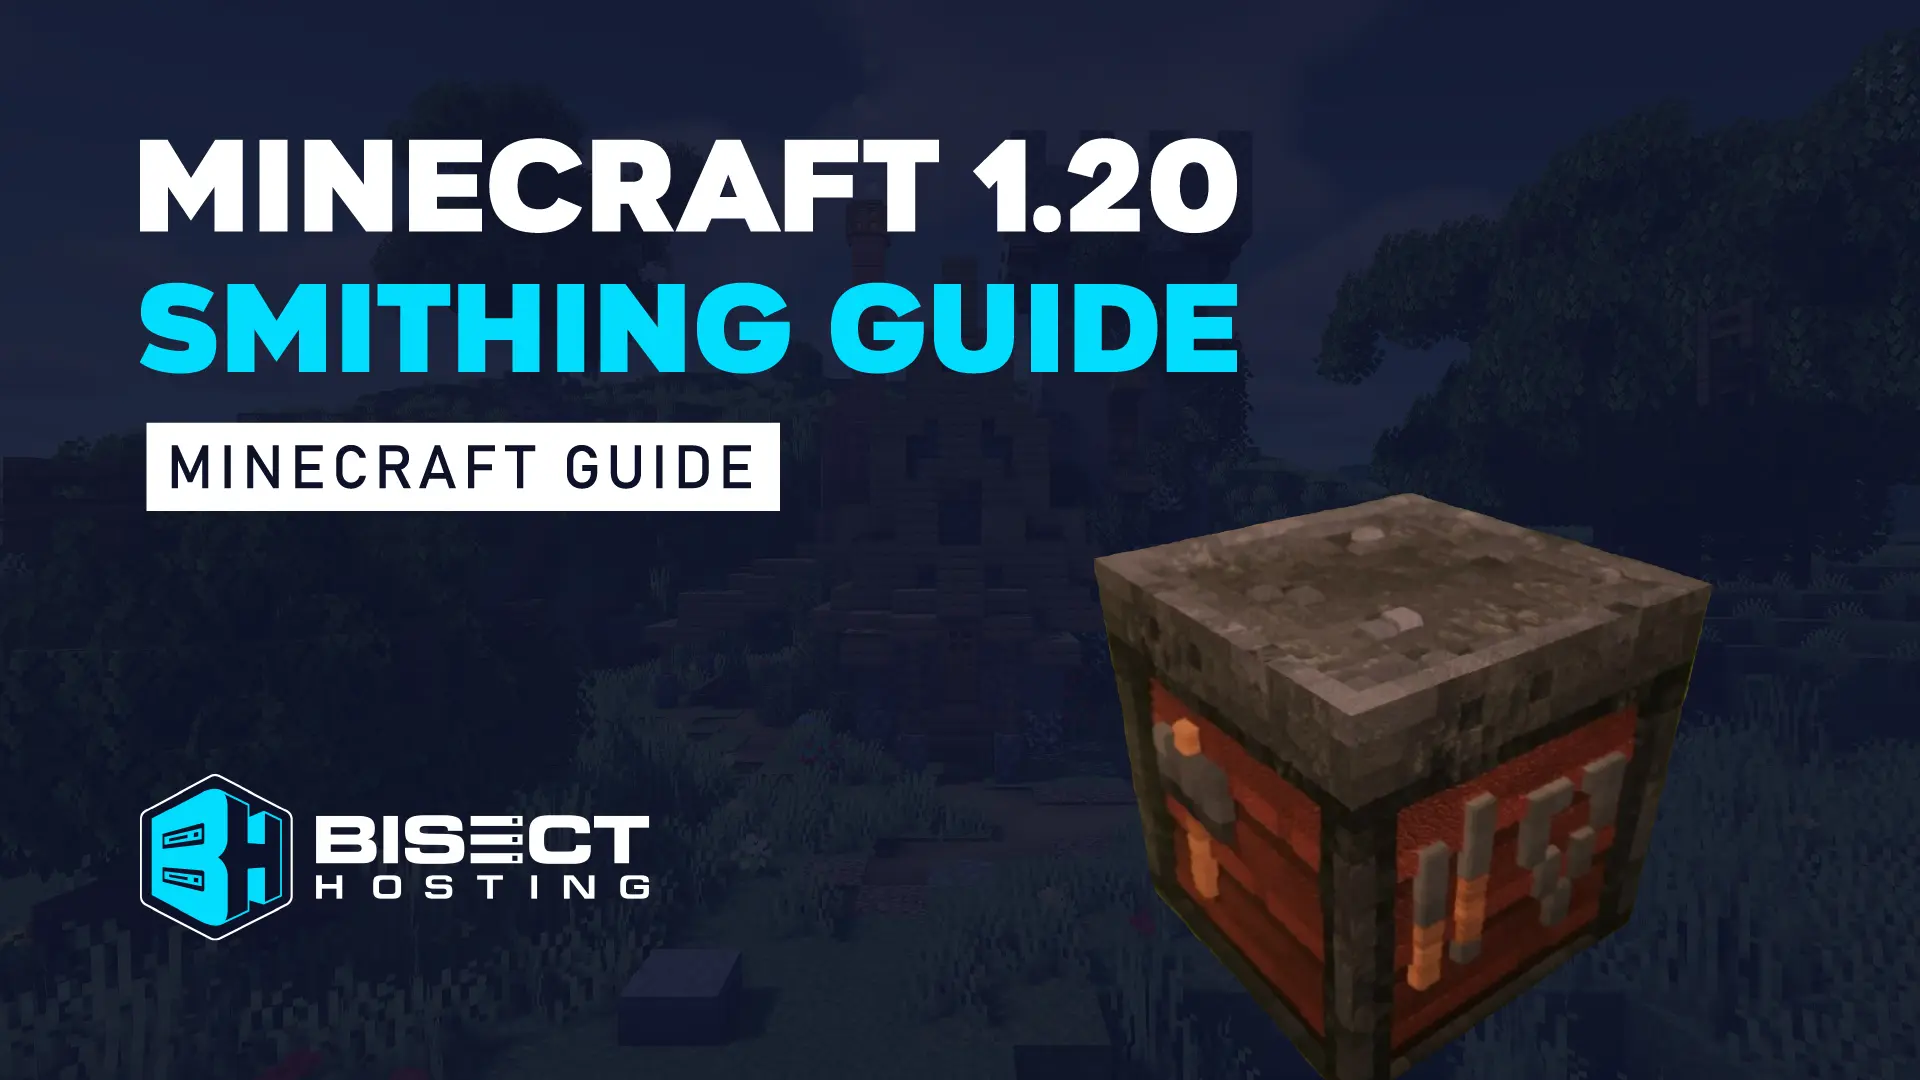 Minecraft 1.20 Smithing Guide